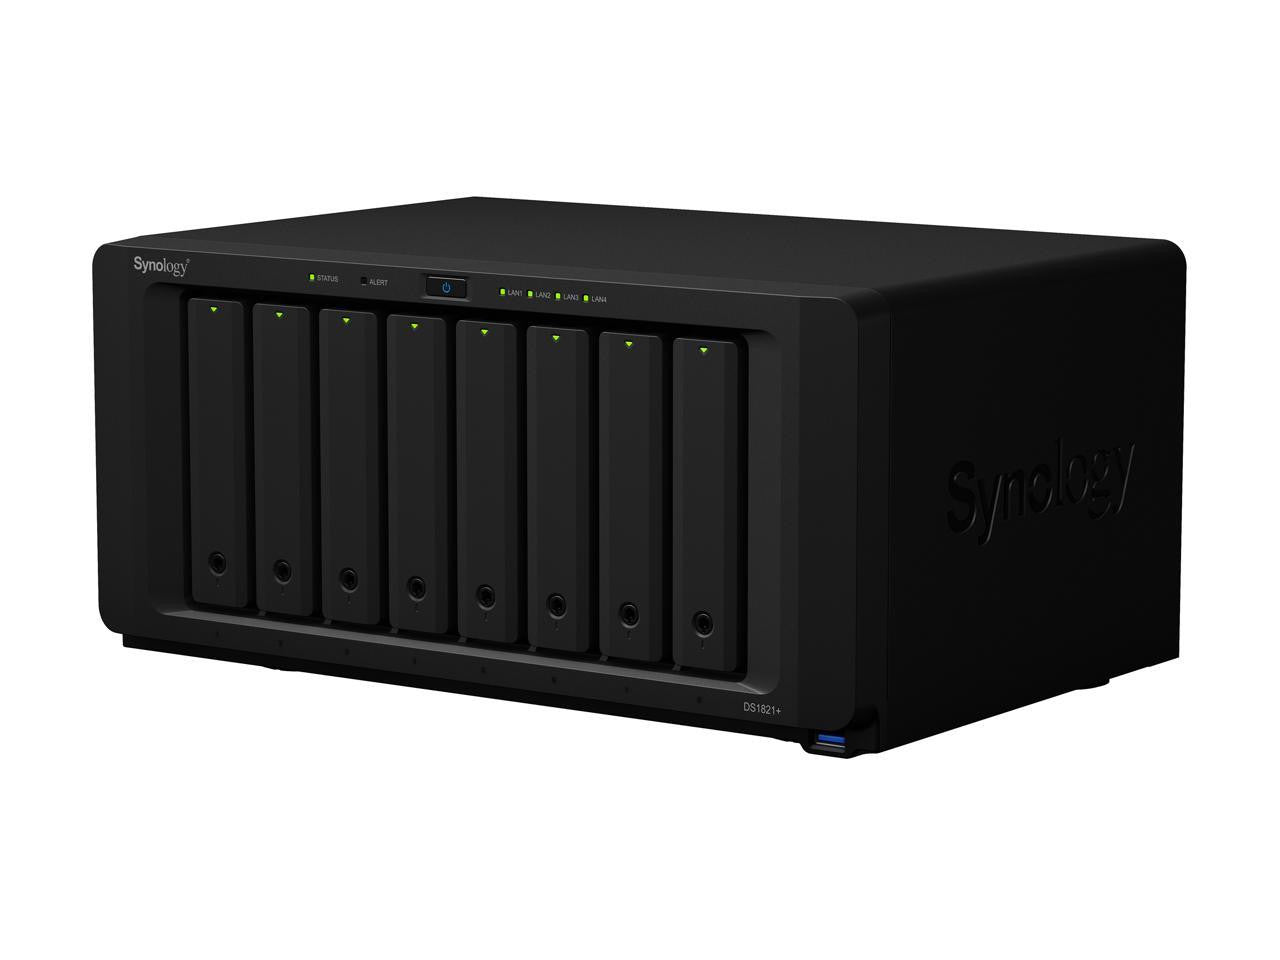 Synology DS1821+ 8-BAY DiskStation with 16GB Synology RAM and 112TB (8x14TB) Western Digital RED PLUS Drives Fully Assembled and Tested